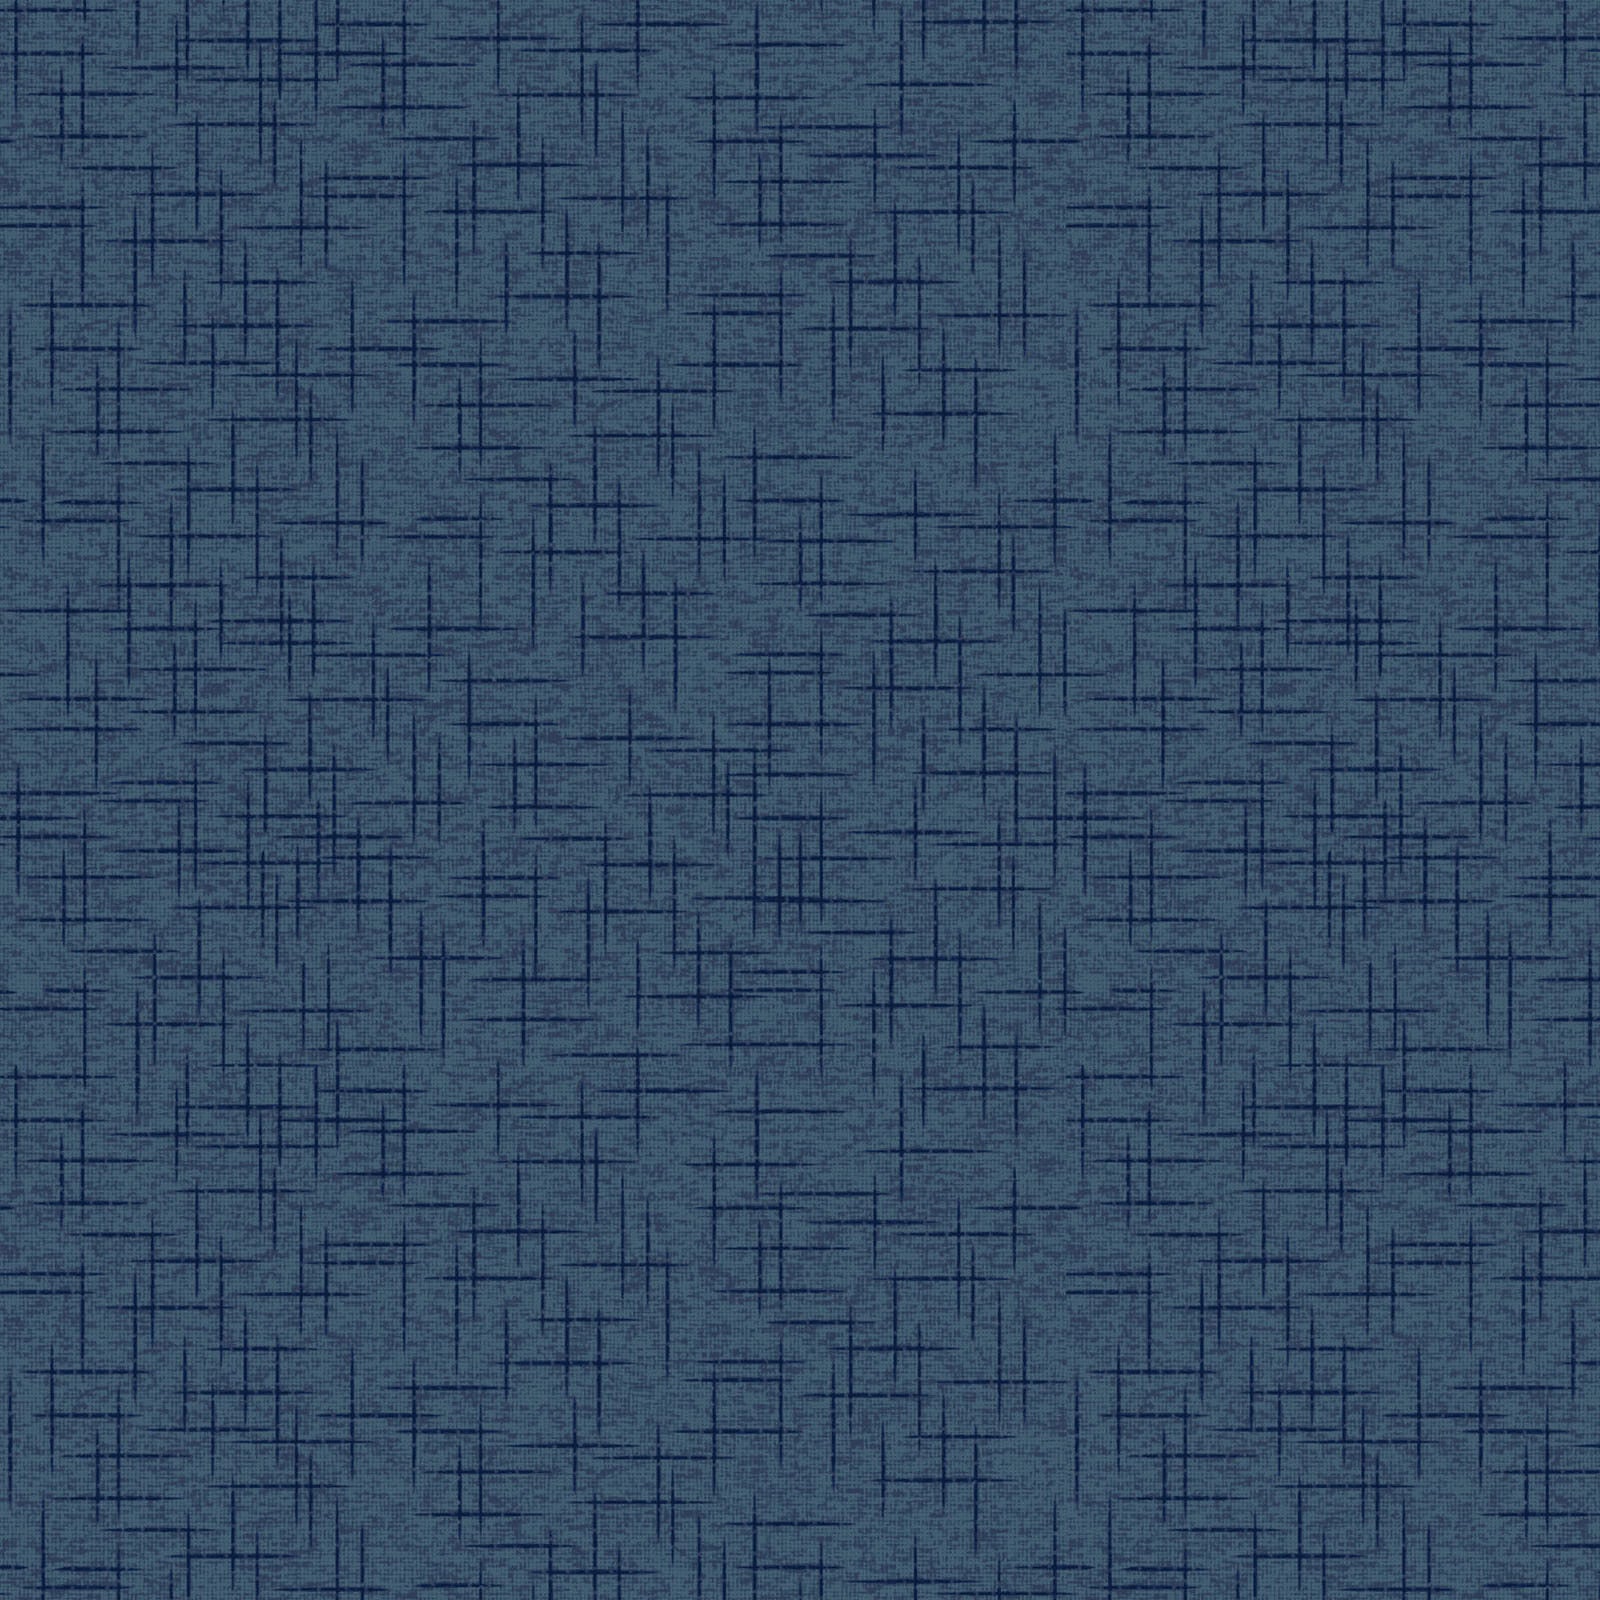 Linen texture in navy is part of the Kimberbell Basics line designed by Kimberbell for Maywood Studio. This fabric features navy tone on tone linen texture, making it the perfect blender to use in any quilting project. The photo is a swatch that shows the detail of the tone on tone hash mark detail.